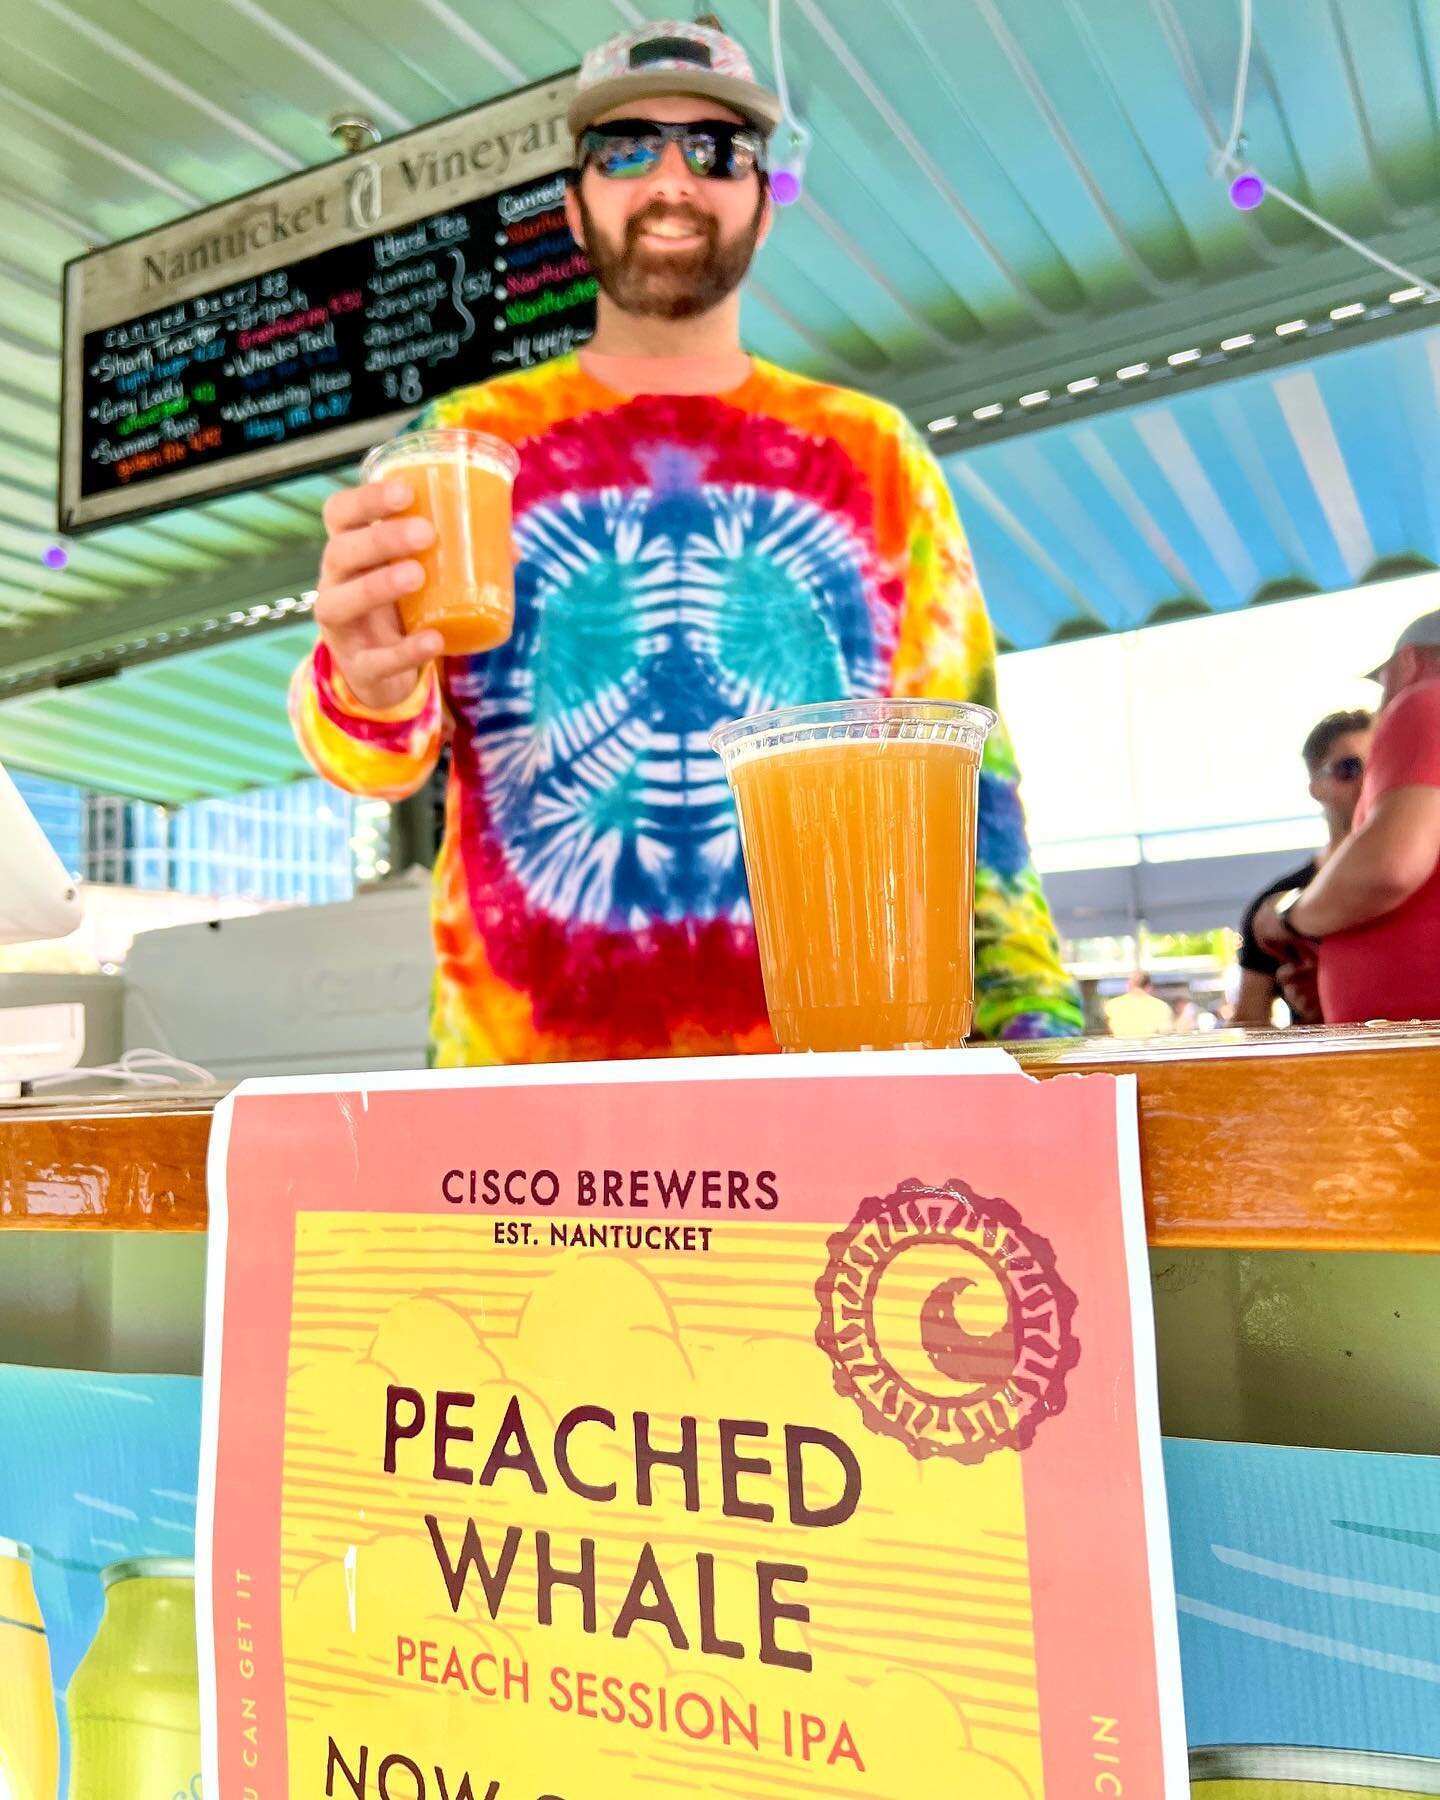 Tired of feeling like a beached whale, after having a beer in the sun?? Us too! So this summer we brewed a new lil Session IPA we&rsquo;re calling PEACHED WHALE! 🍑 🐋 

It&rsquo;ll leave you feeling light and fruity - comin&rsquo; in at just 4.9% AB